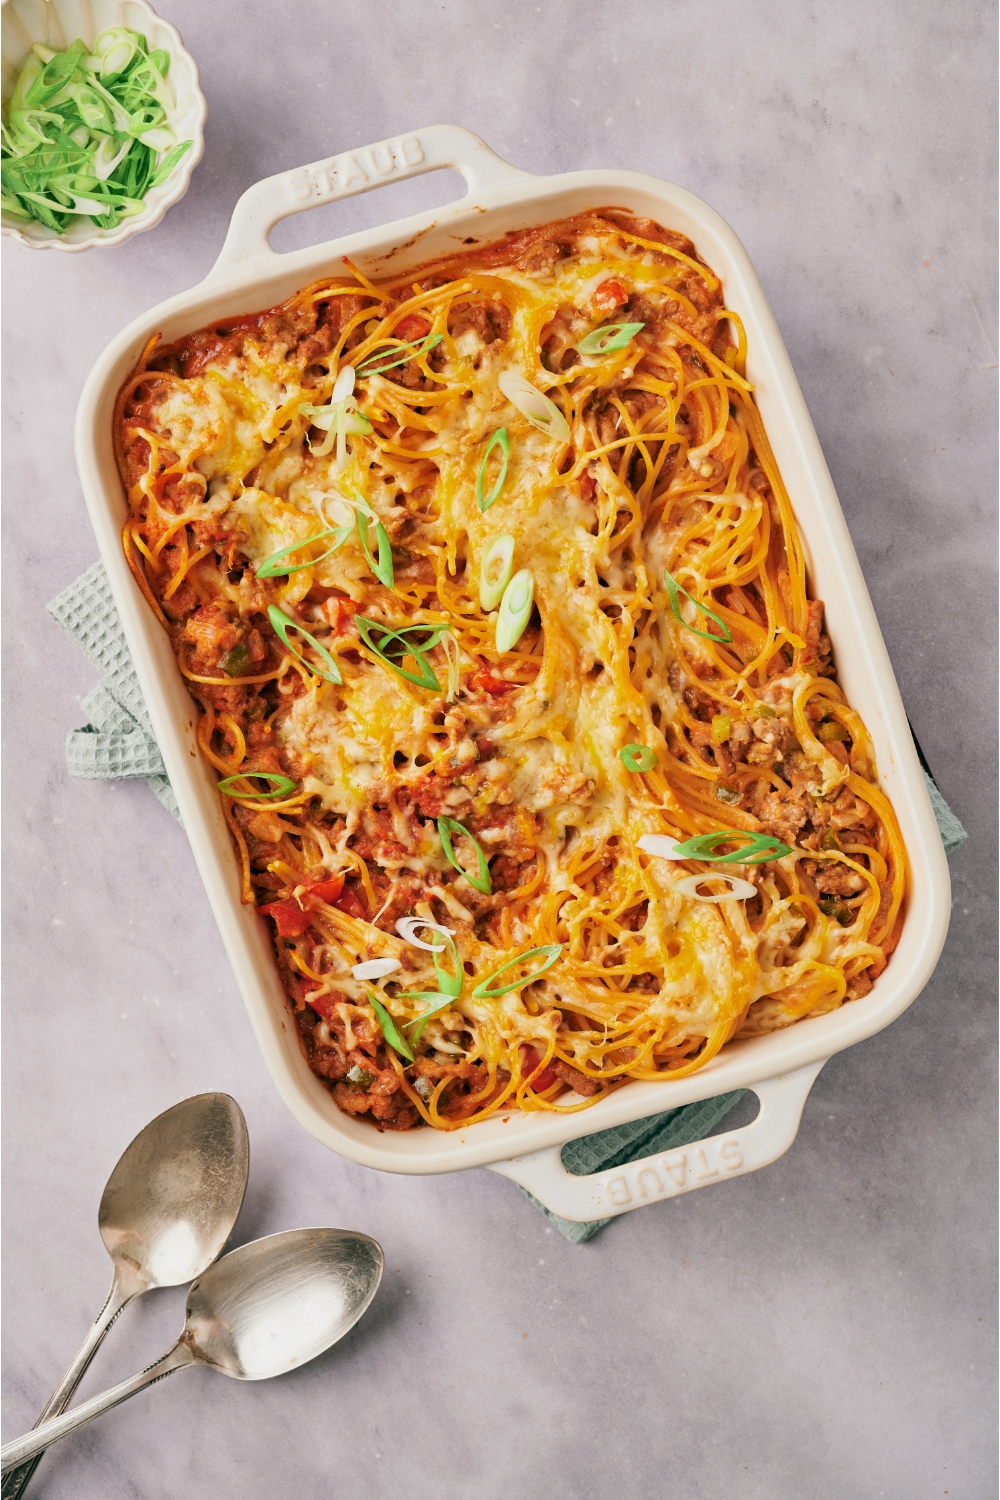 A white baking dish filled with cooked spaghetti casserole covered in a layer of melted cheese and green onions.